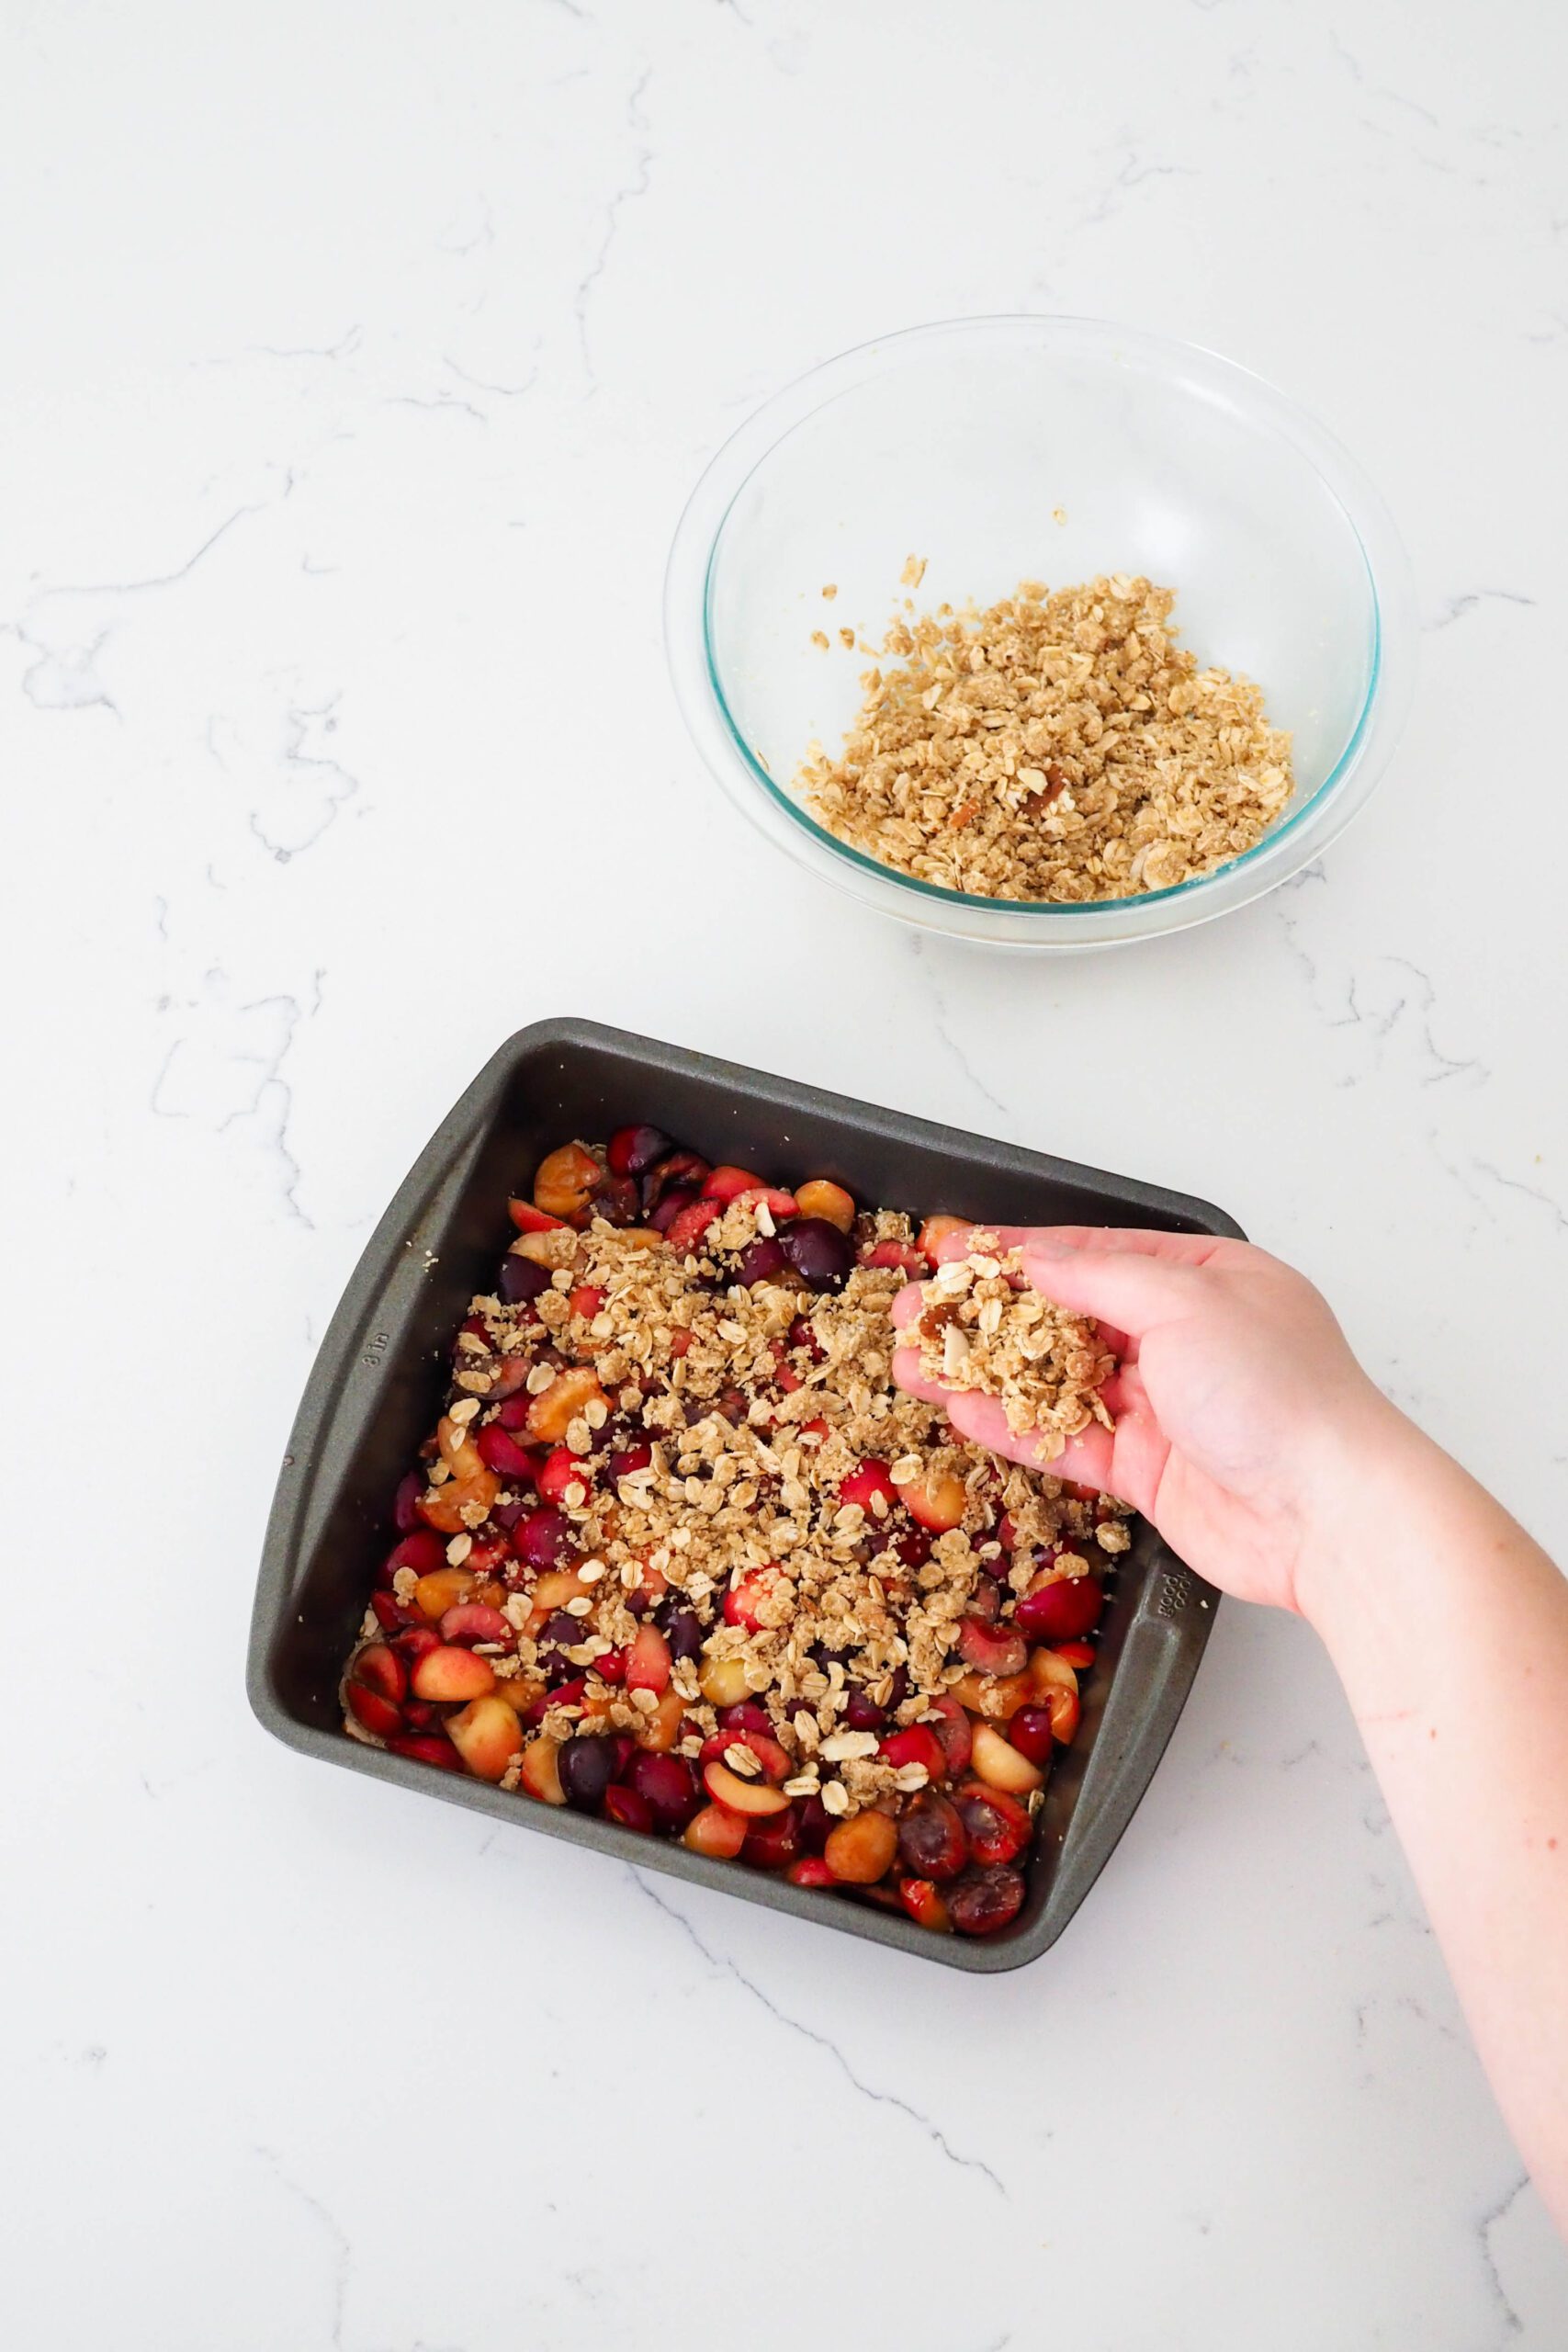 A hand sprinkles gluten-free crumble on top of a cherry layer in a square pan.